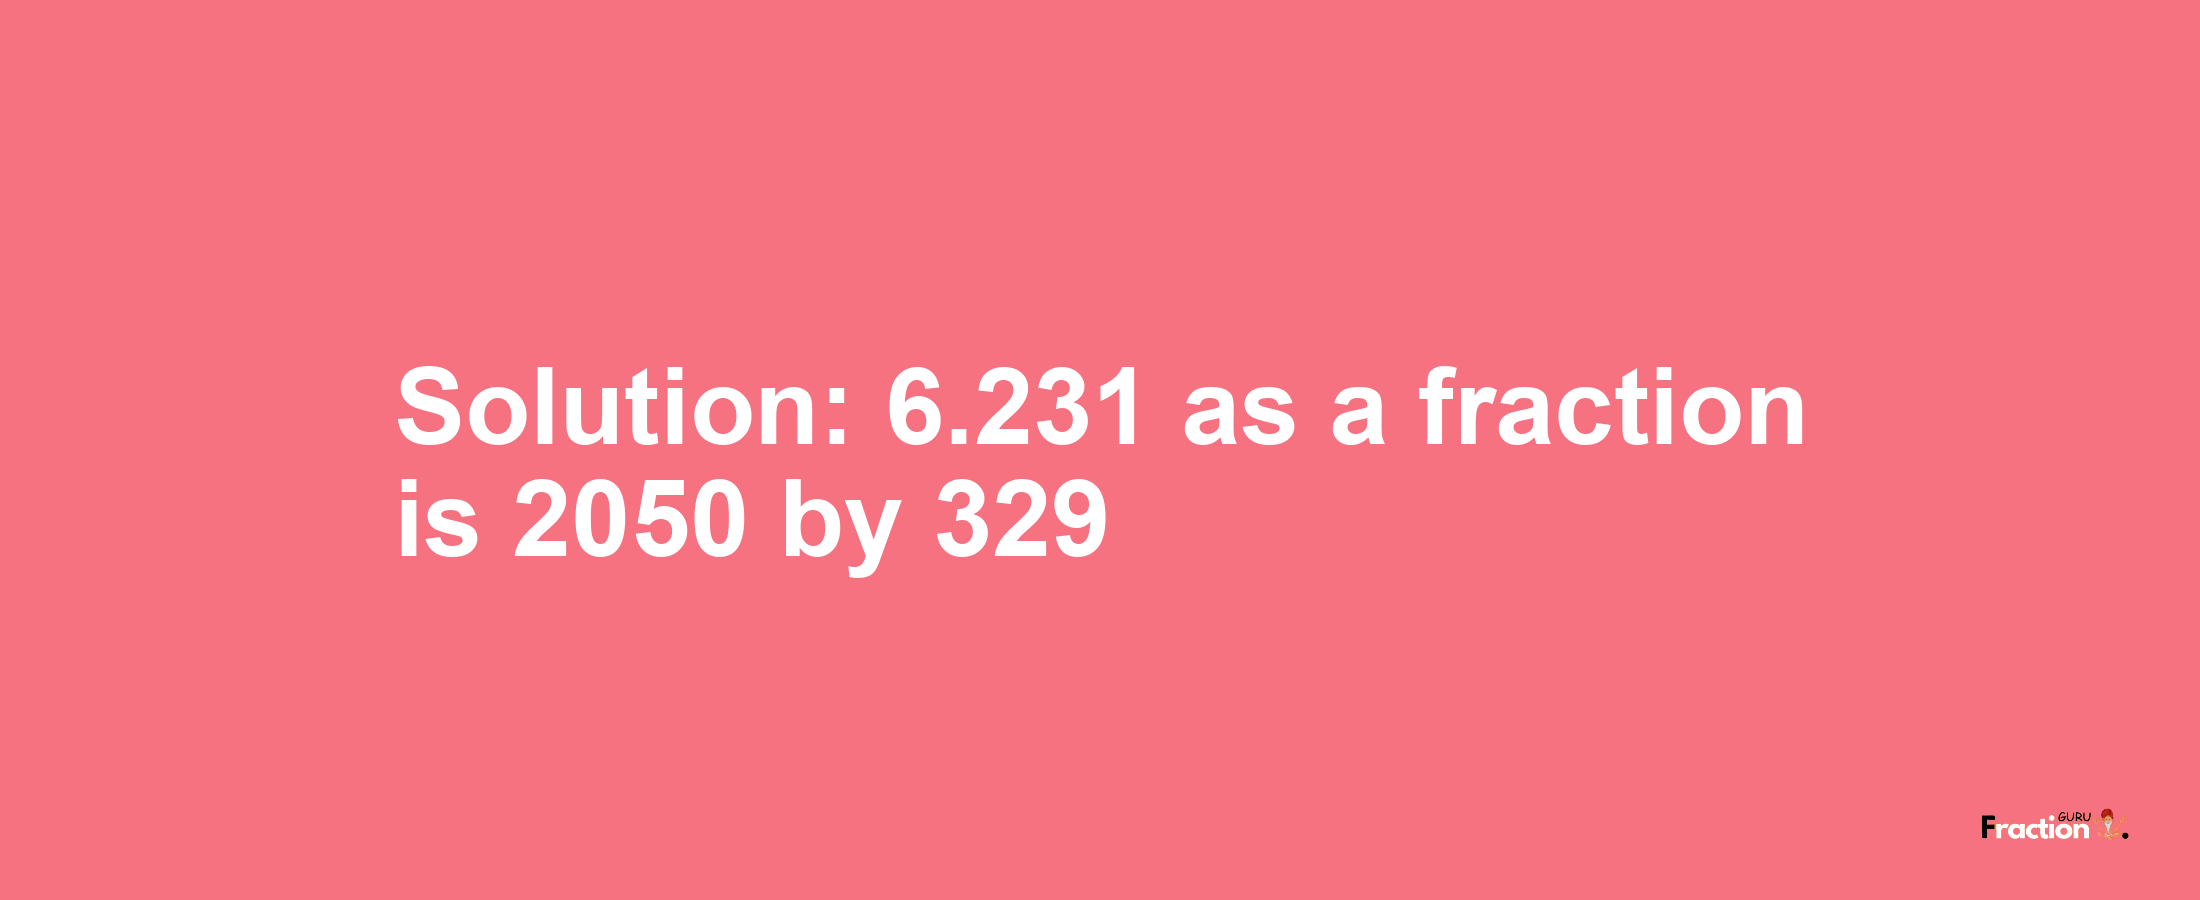 Solution:6.231 as a fraction is 2050/329